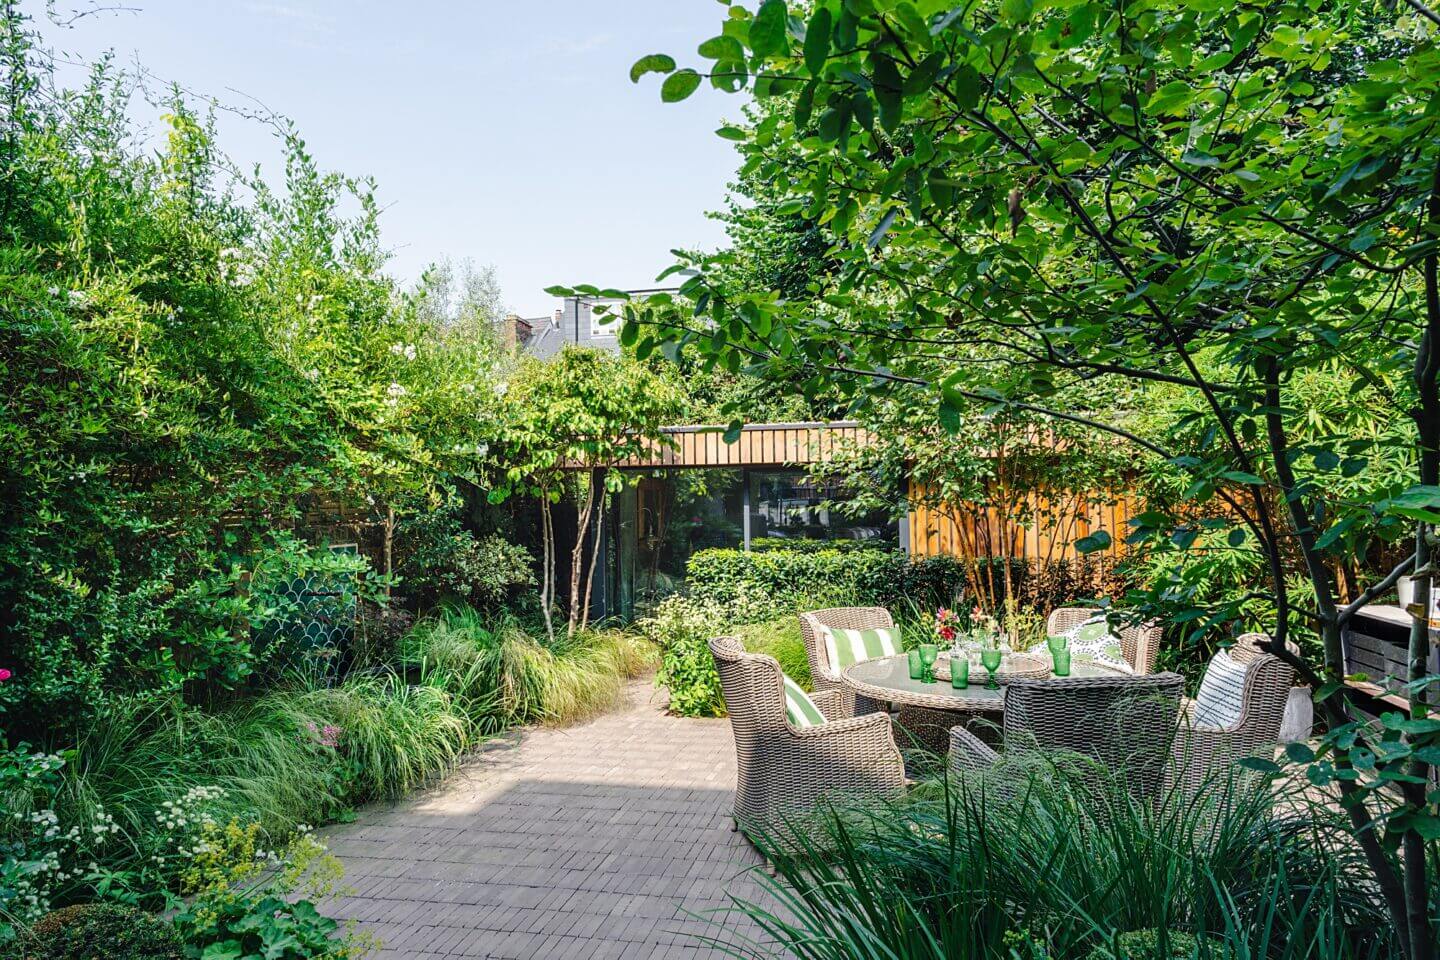 Family garden design urban courtyard with dining area and home office softened by lush green planting London